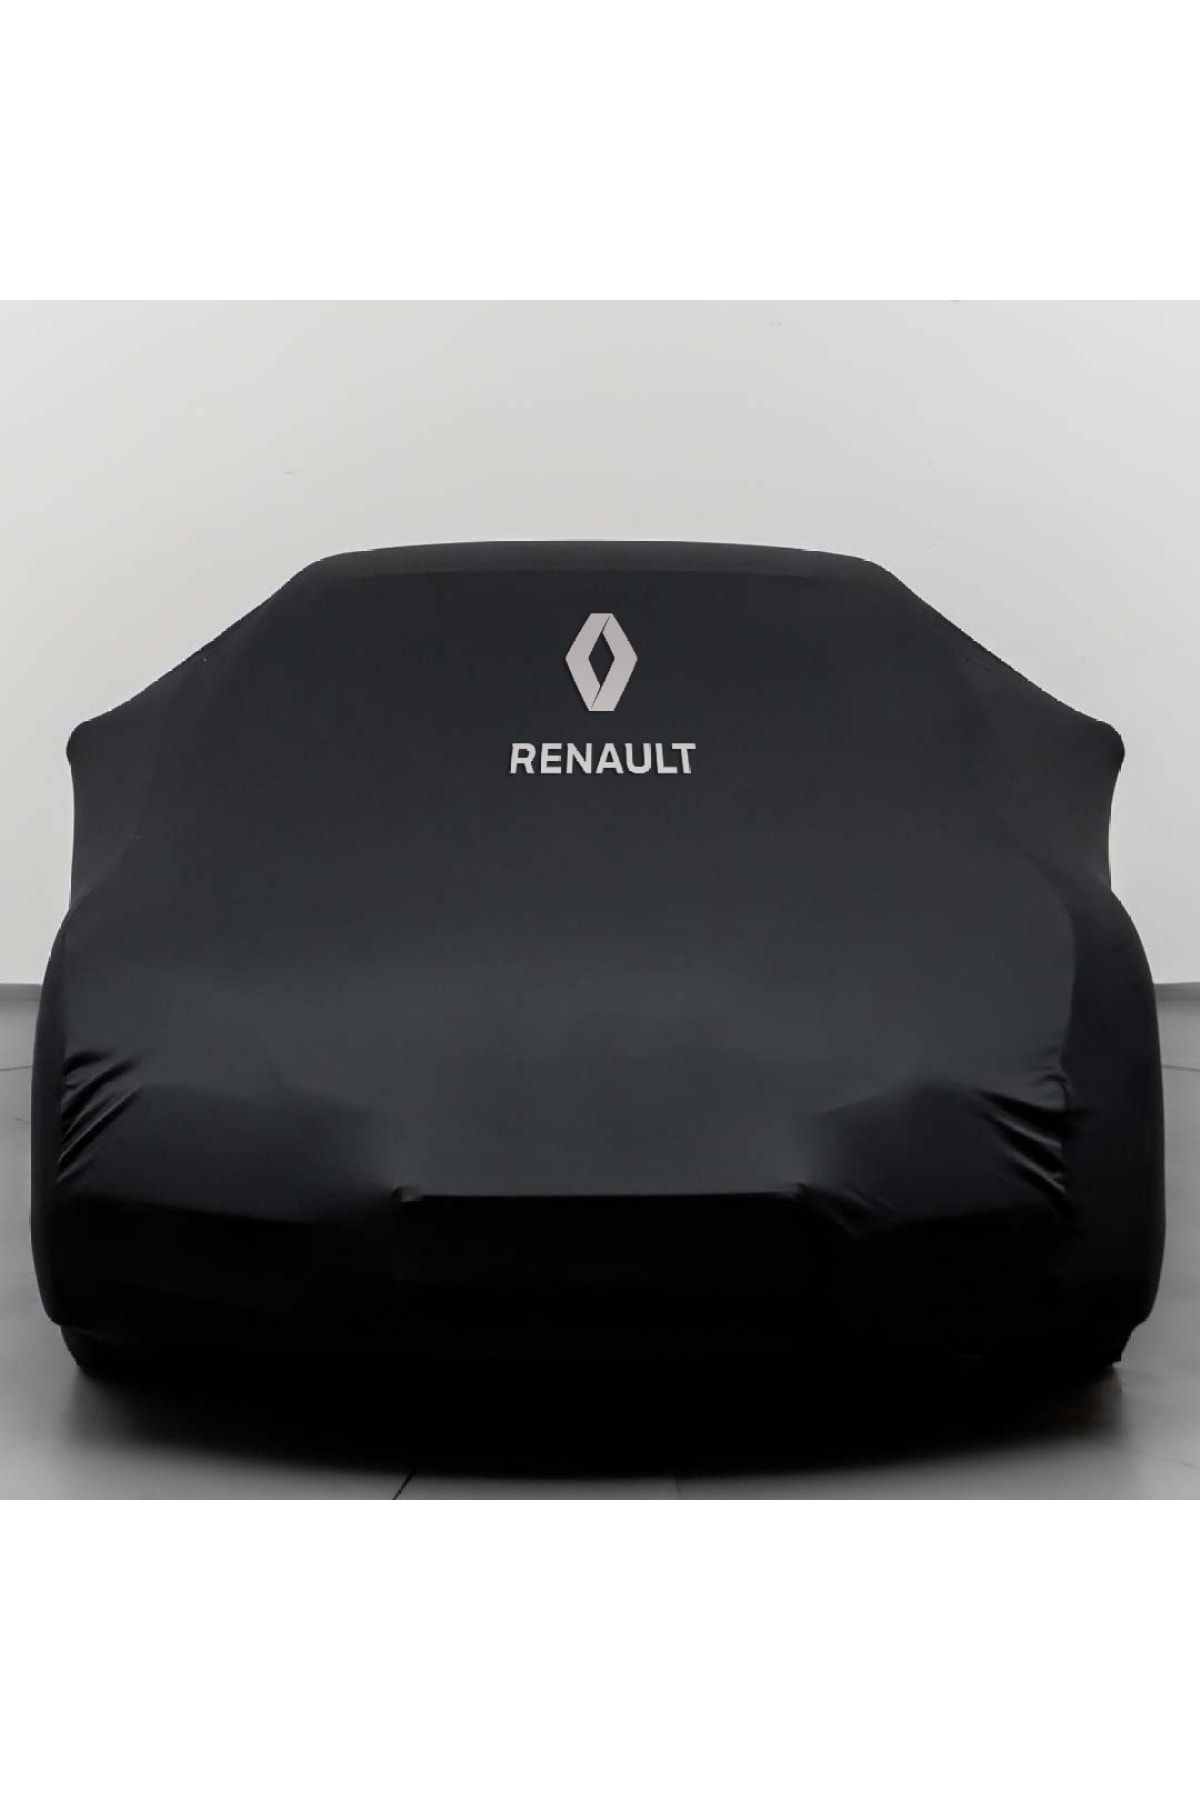 Teksin Renault Laguna 3 Grand Tour Station Wagon (2007-2015) Gray  Automobile Fabric Combed Cotton Car Cover with Logo - Trendyol